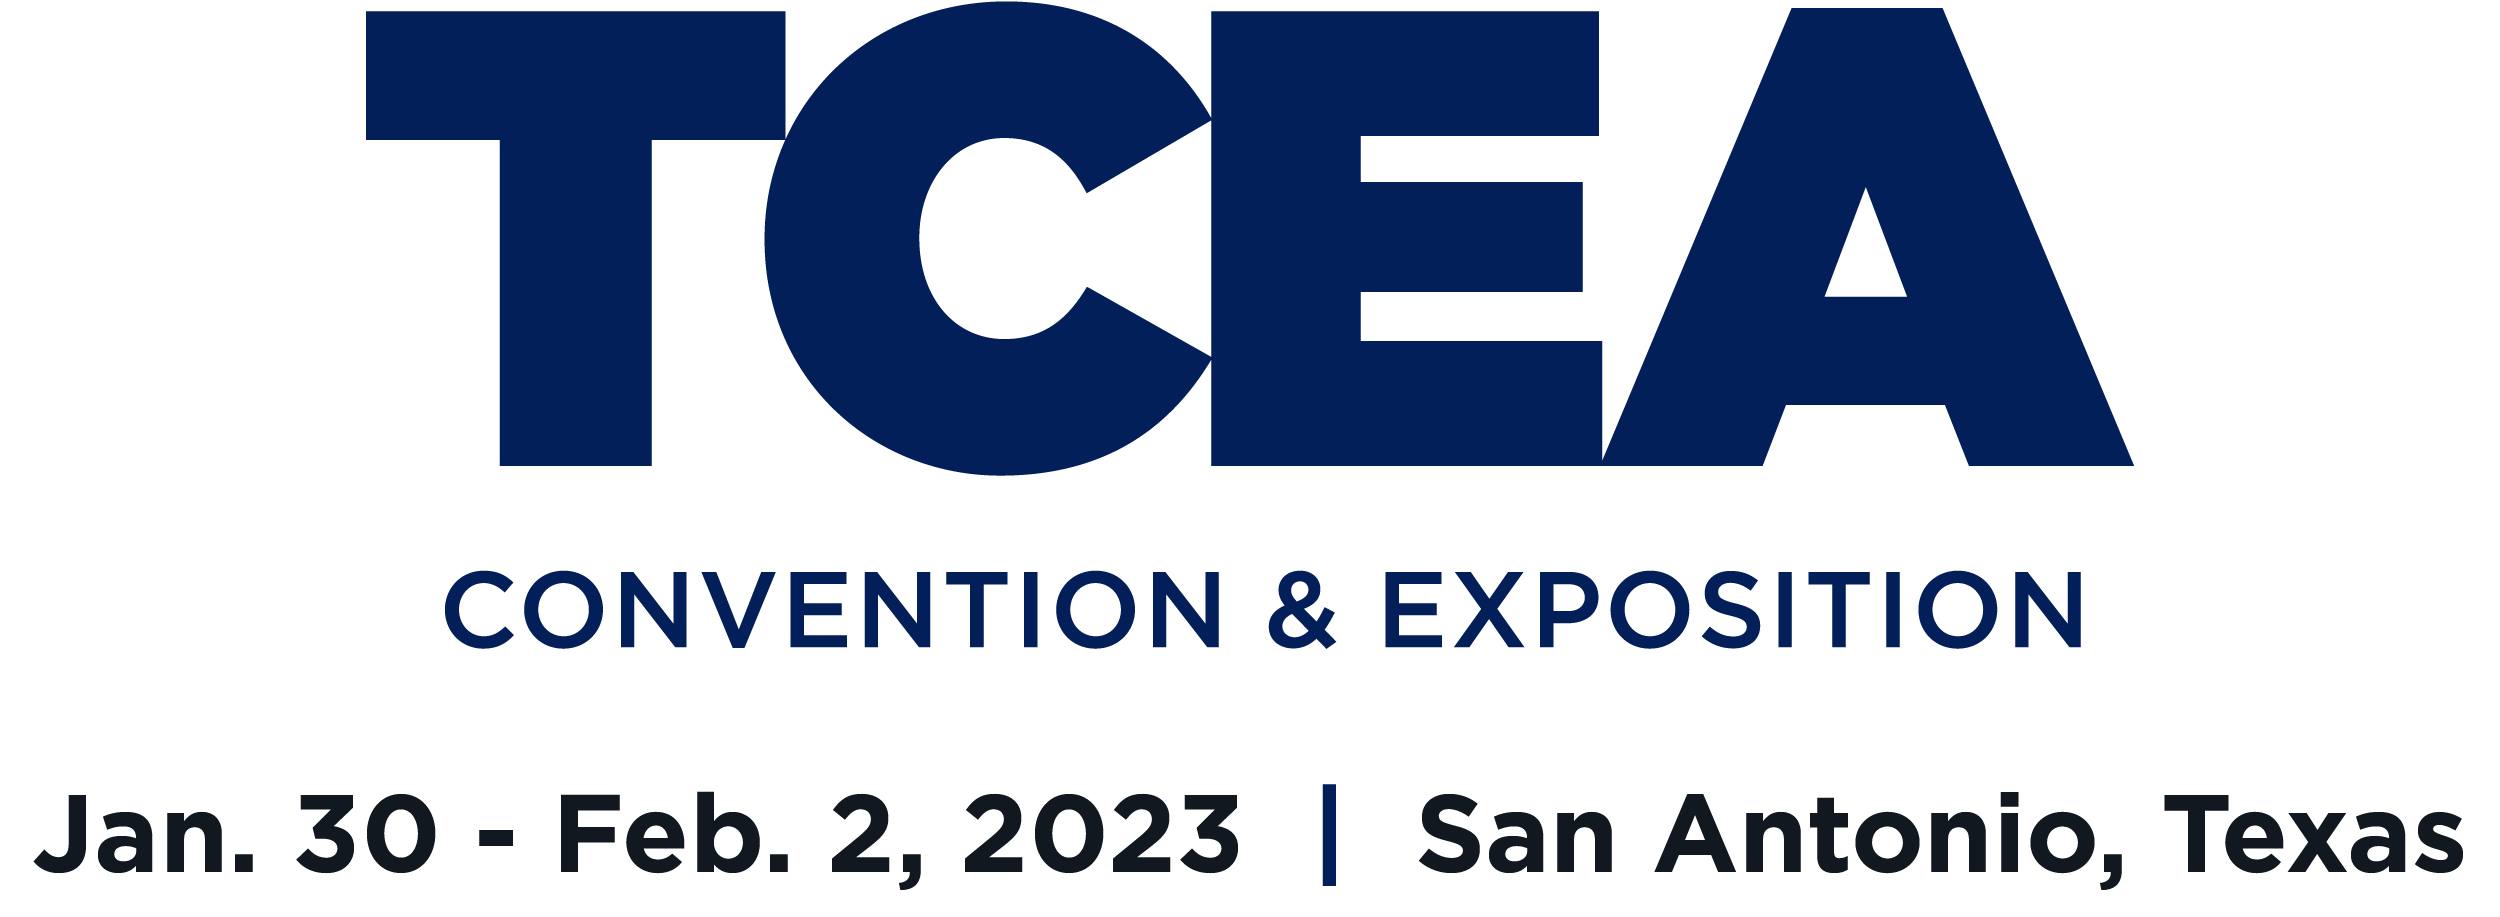 TCEA 2023 Convention & Exposition | Jan. 30 - Feb. 2, 2023